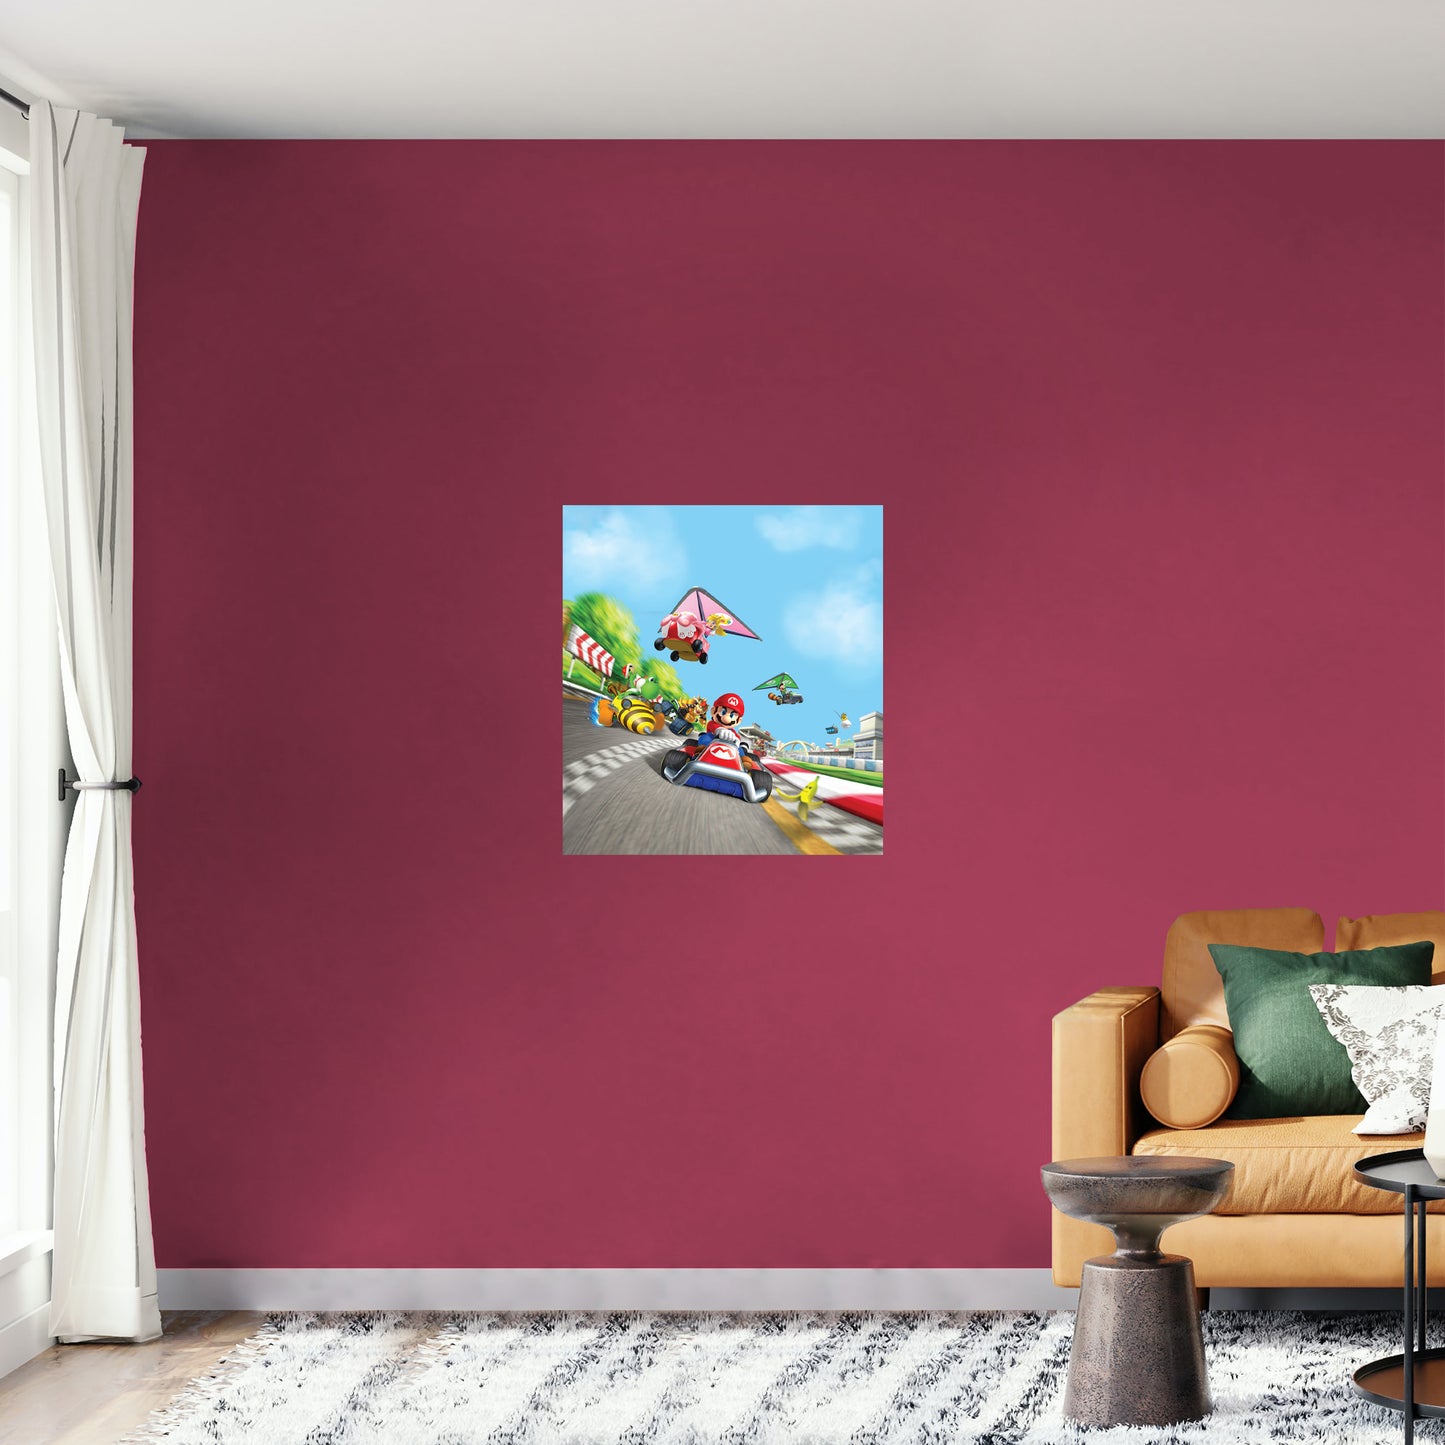 Mario Kart: First Place Mural        -   Removable     Adhesive Decal